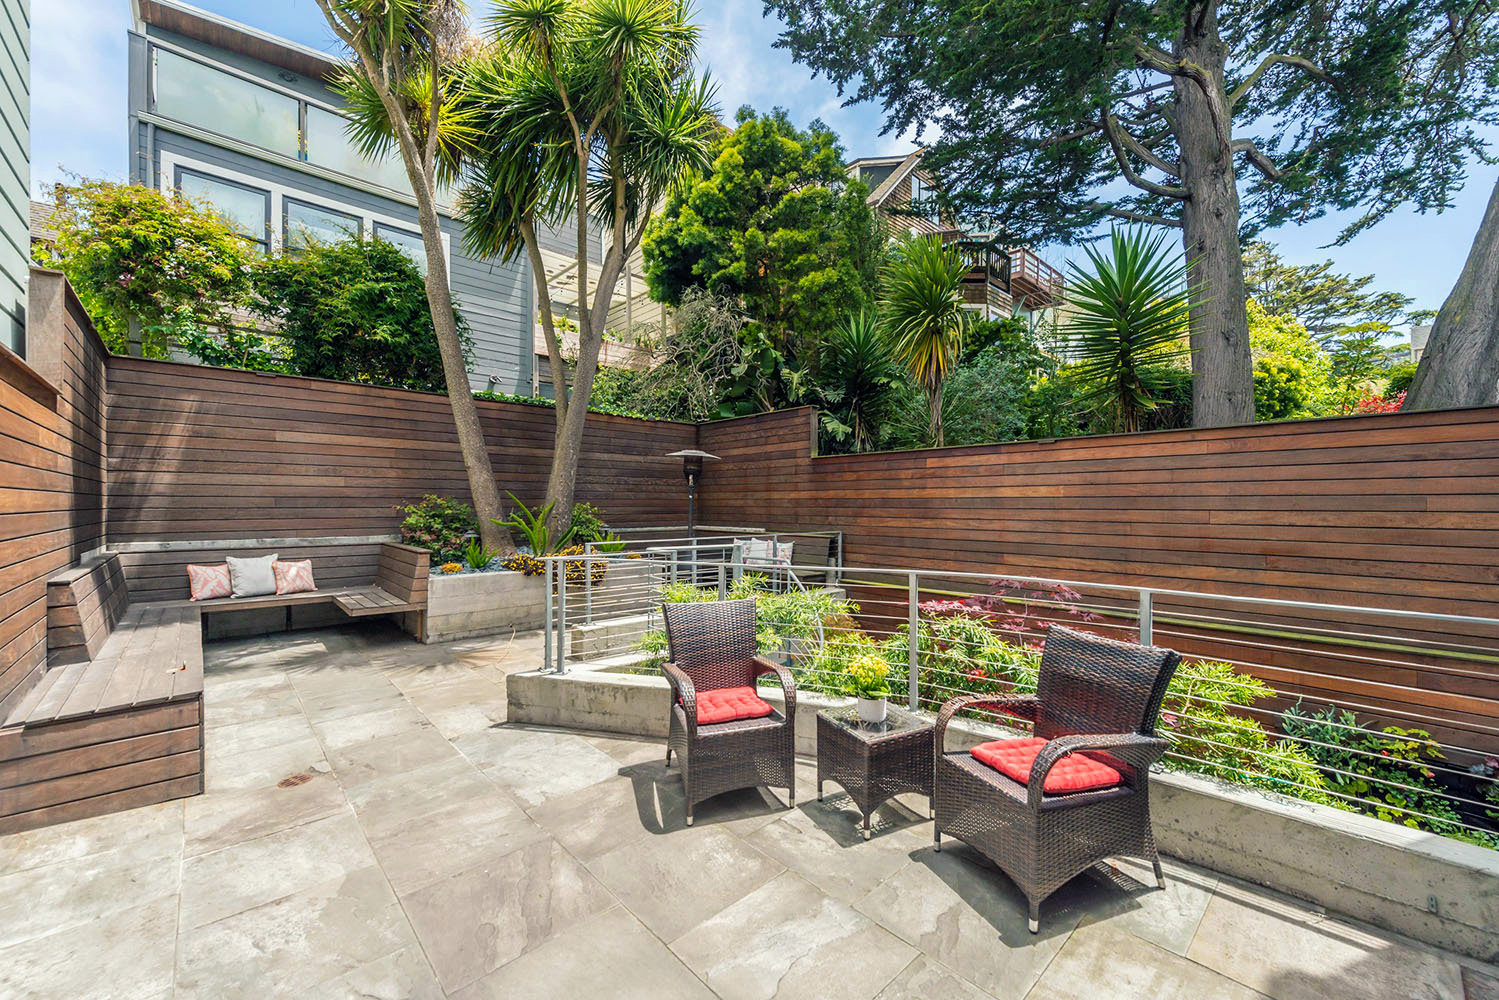 Private garden and outdoor living area, showing a large space with ample room for seating